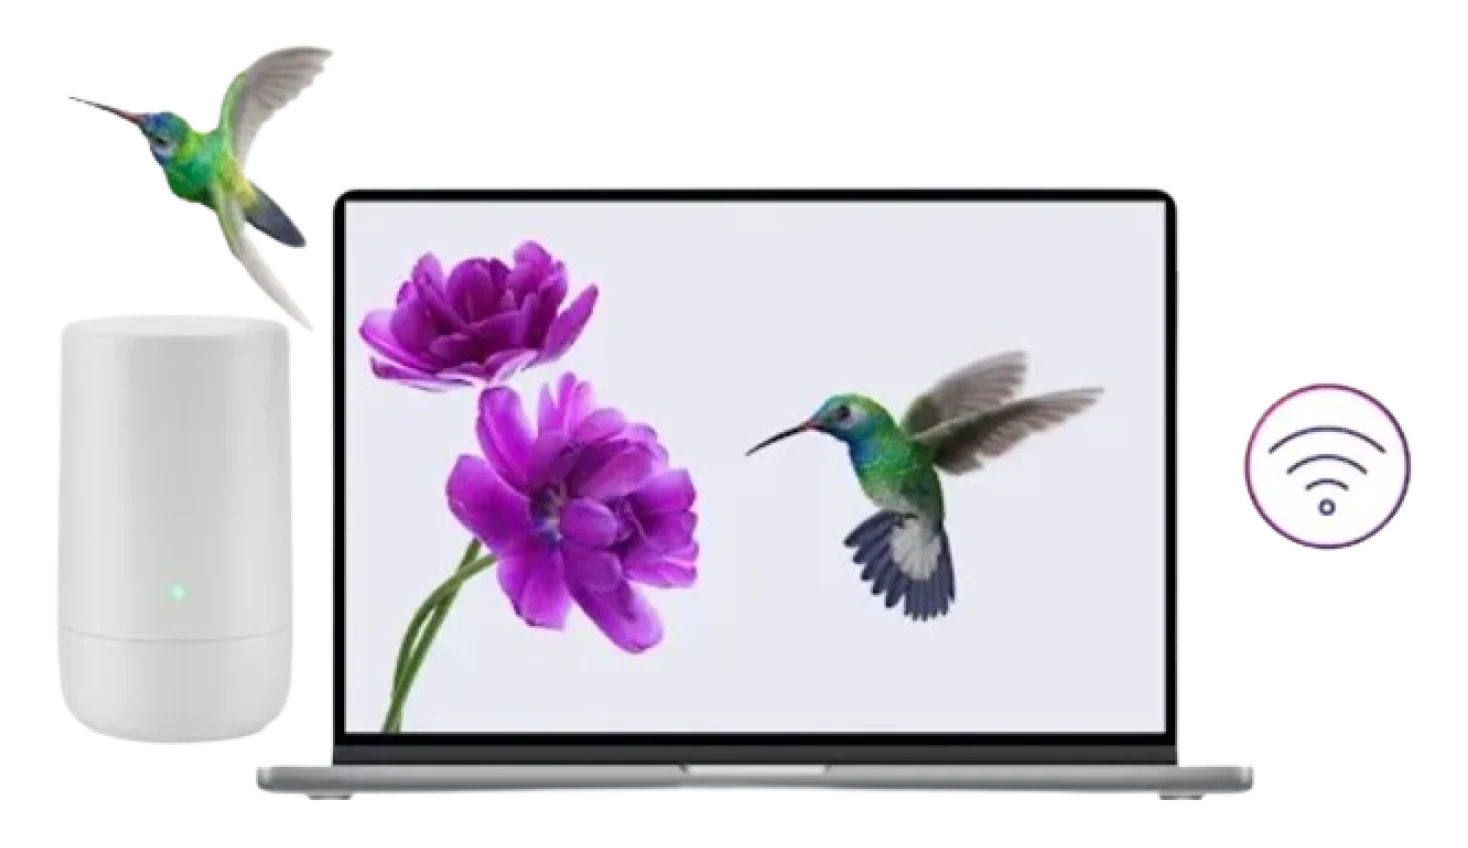 A laptop computer shows an image of a hummingbird and purple flowers. The laptop is surrounded by a TELUS modem, a flying hummingbird and a Wi-Fi symbol. 